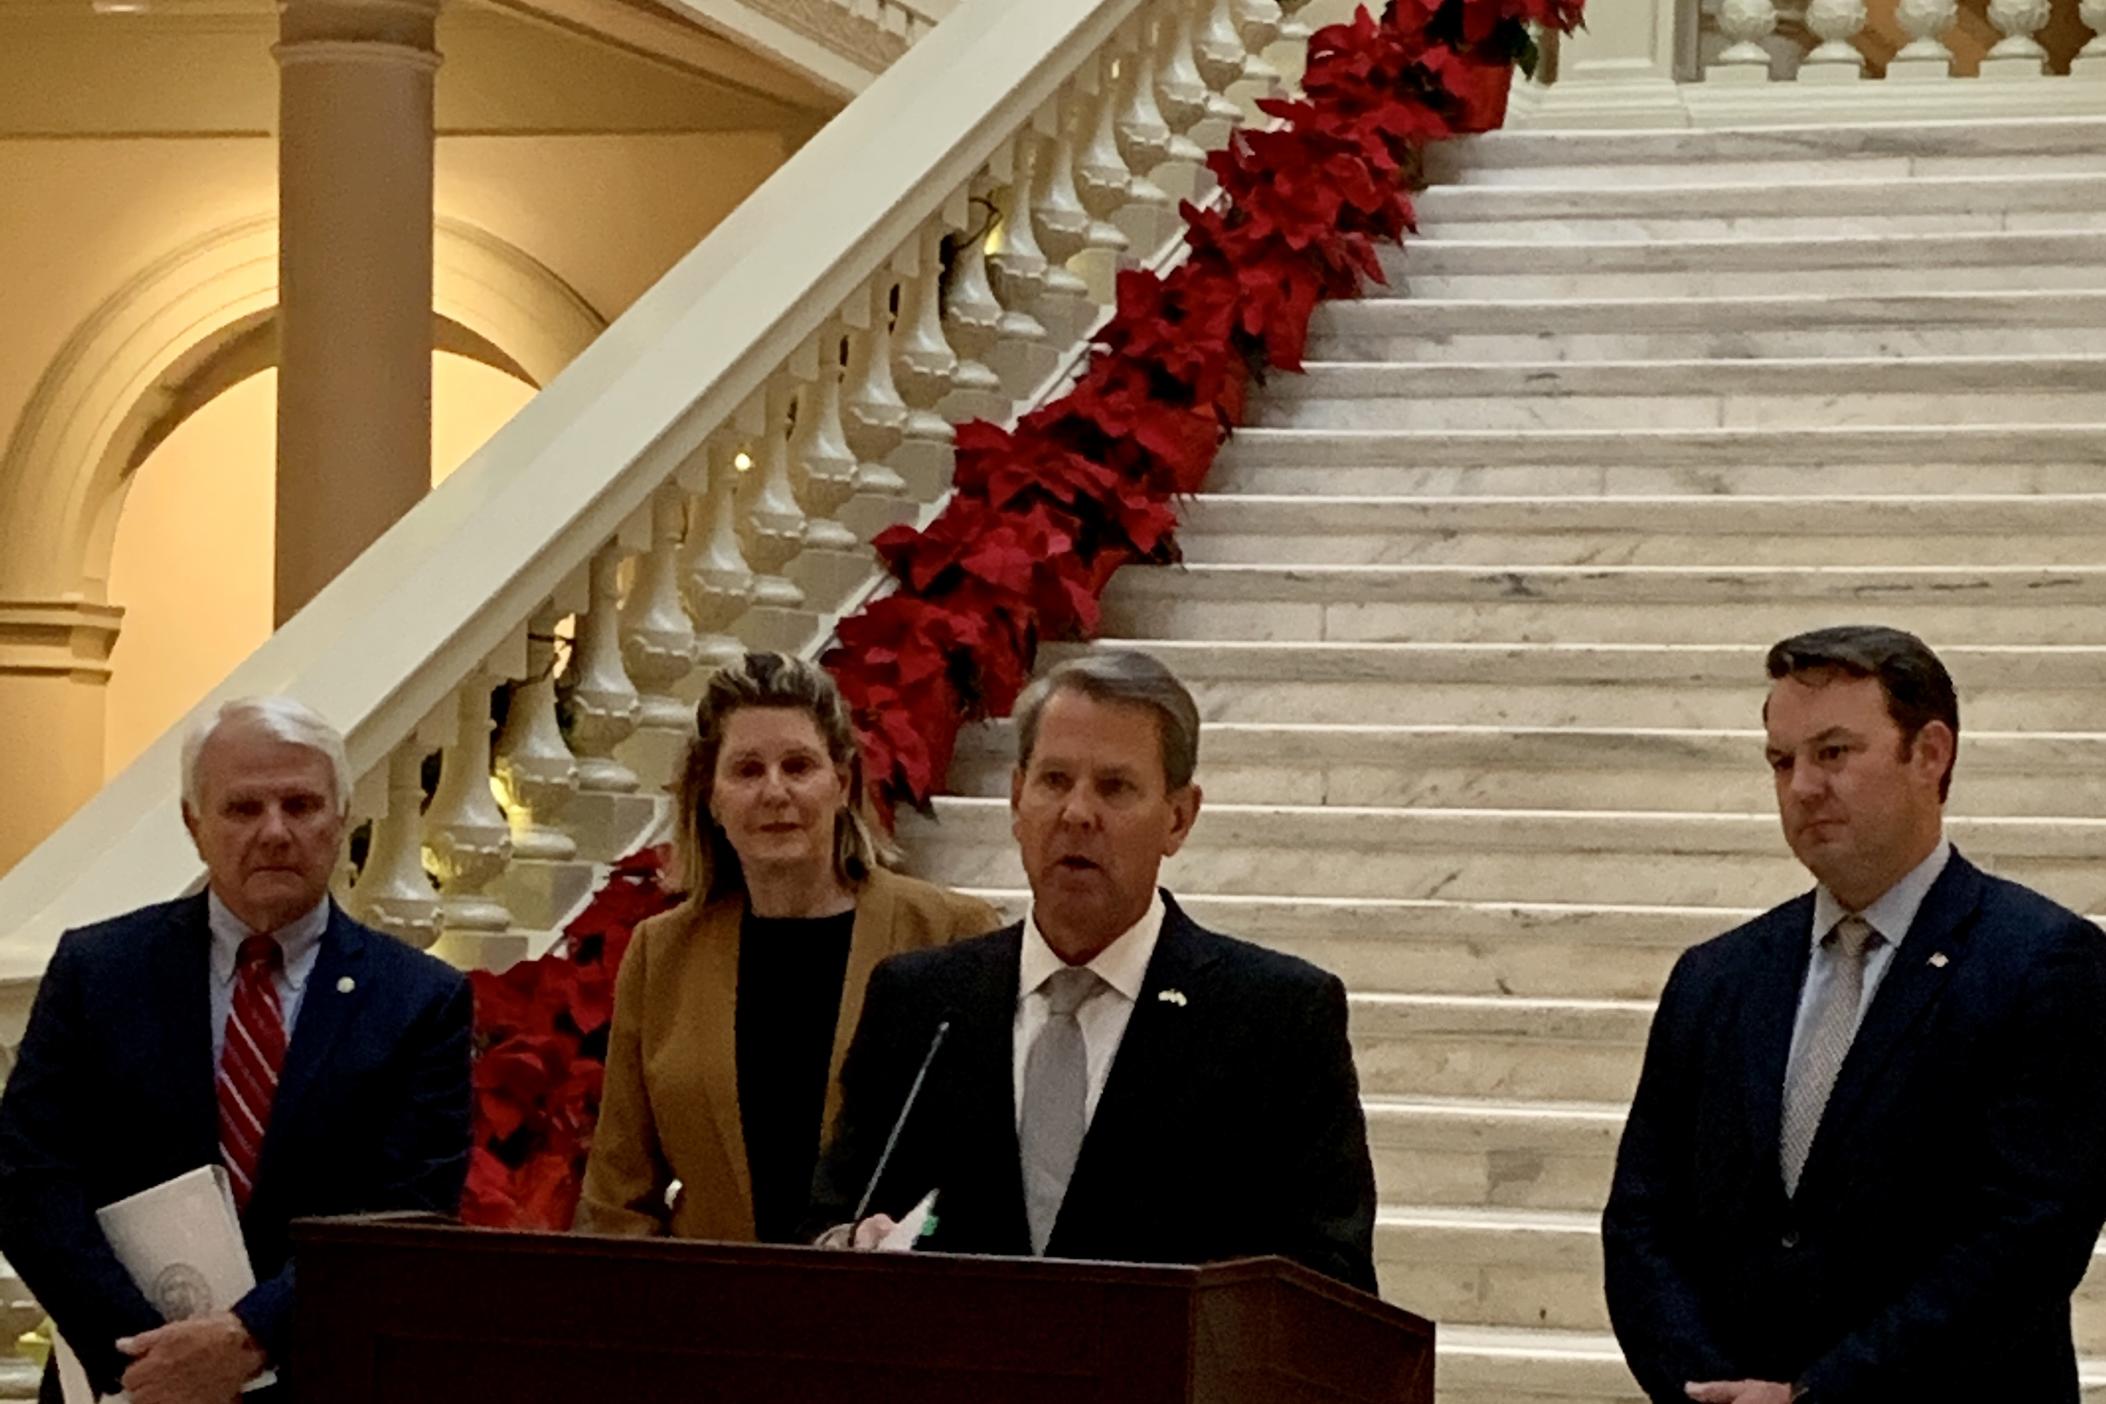 Gov. Brian Kemp speaks about inflation and legislative priorities at the Georgia State Capitol on Dec. 8, 2022